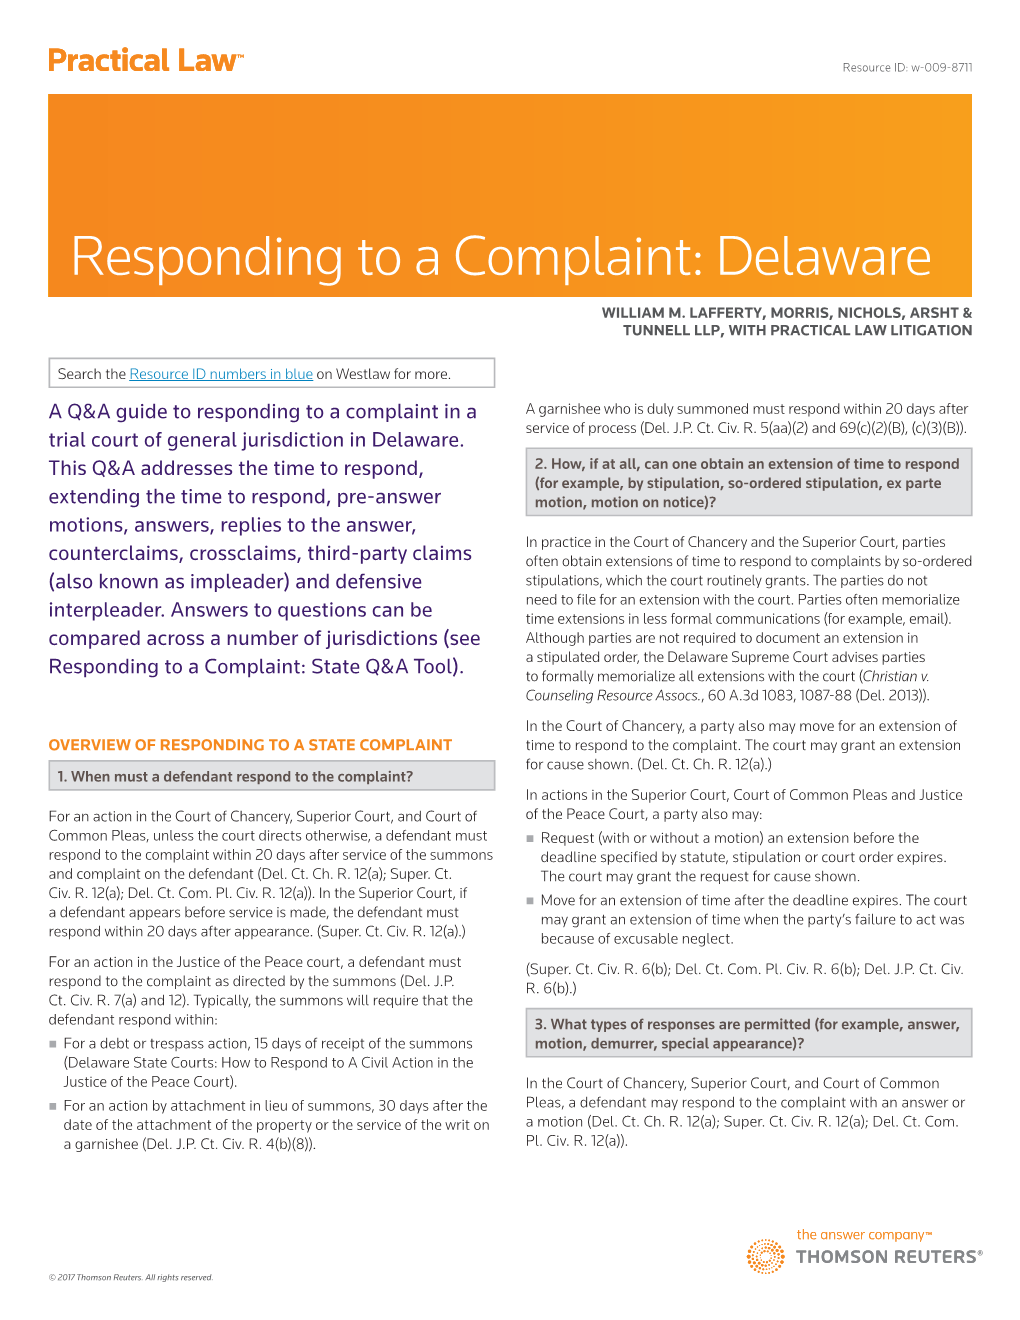 Responding to a Complaint: Delaware